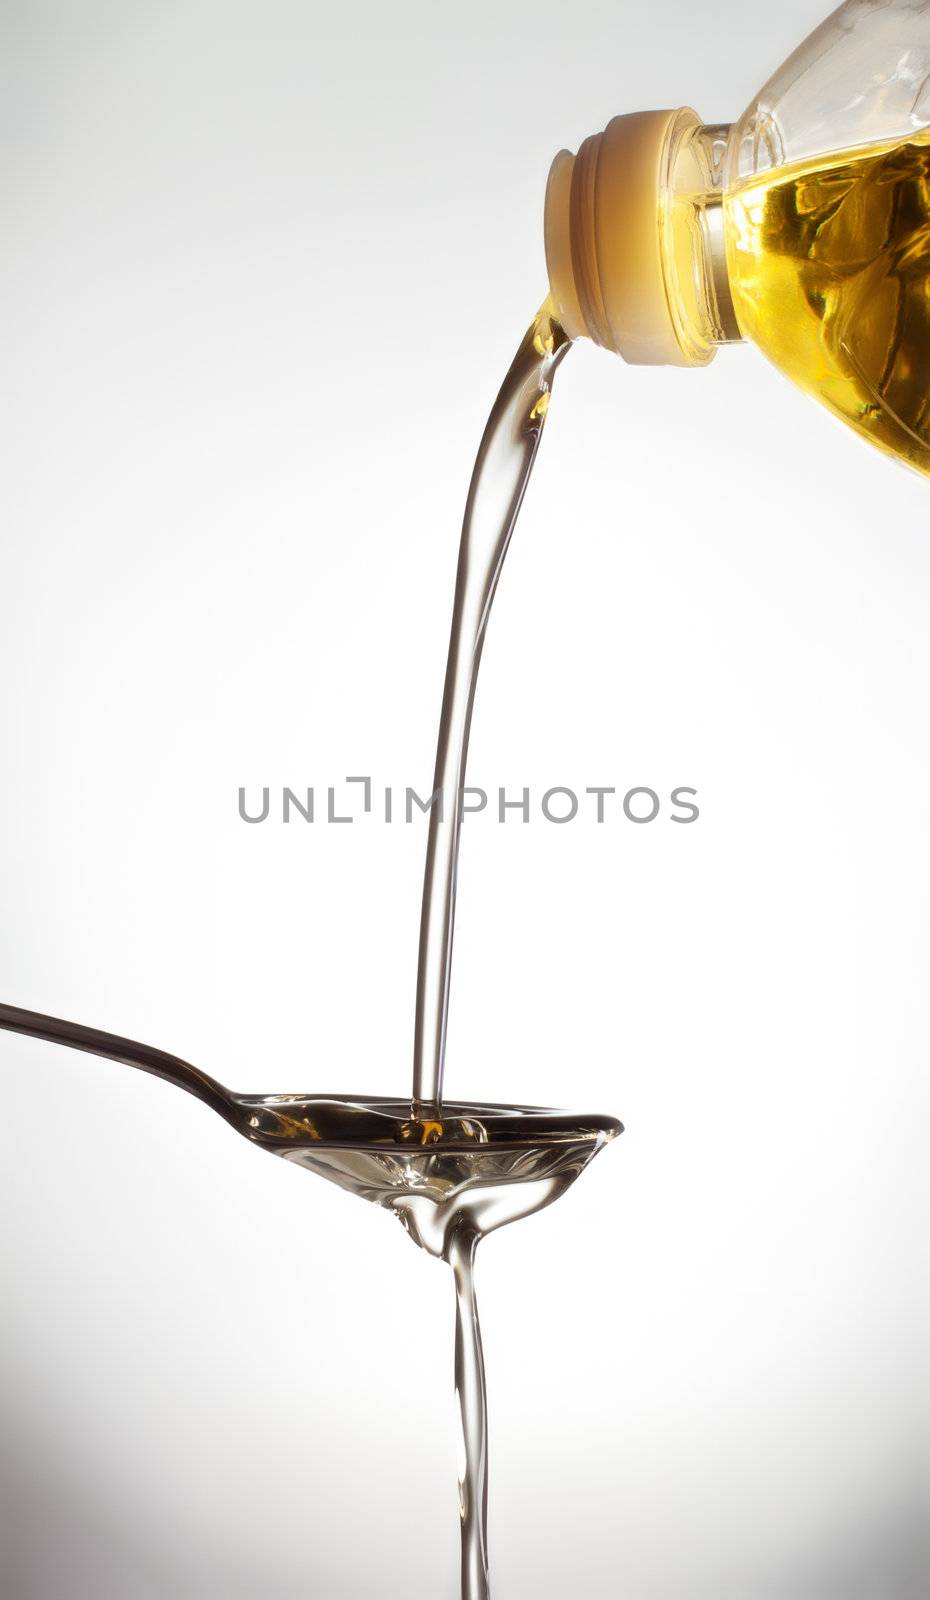 pouring oil by petr_malyshev